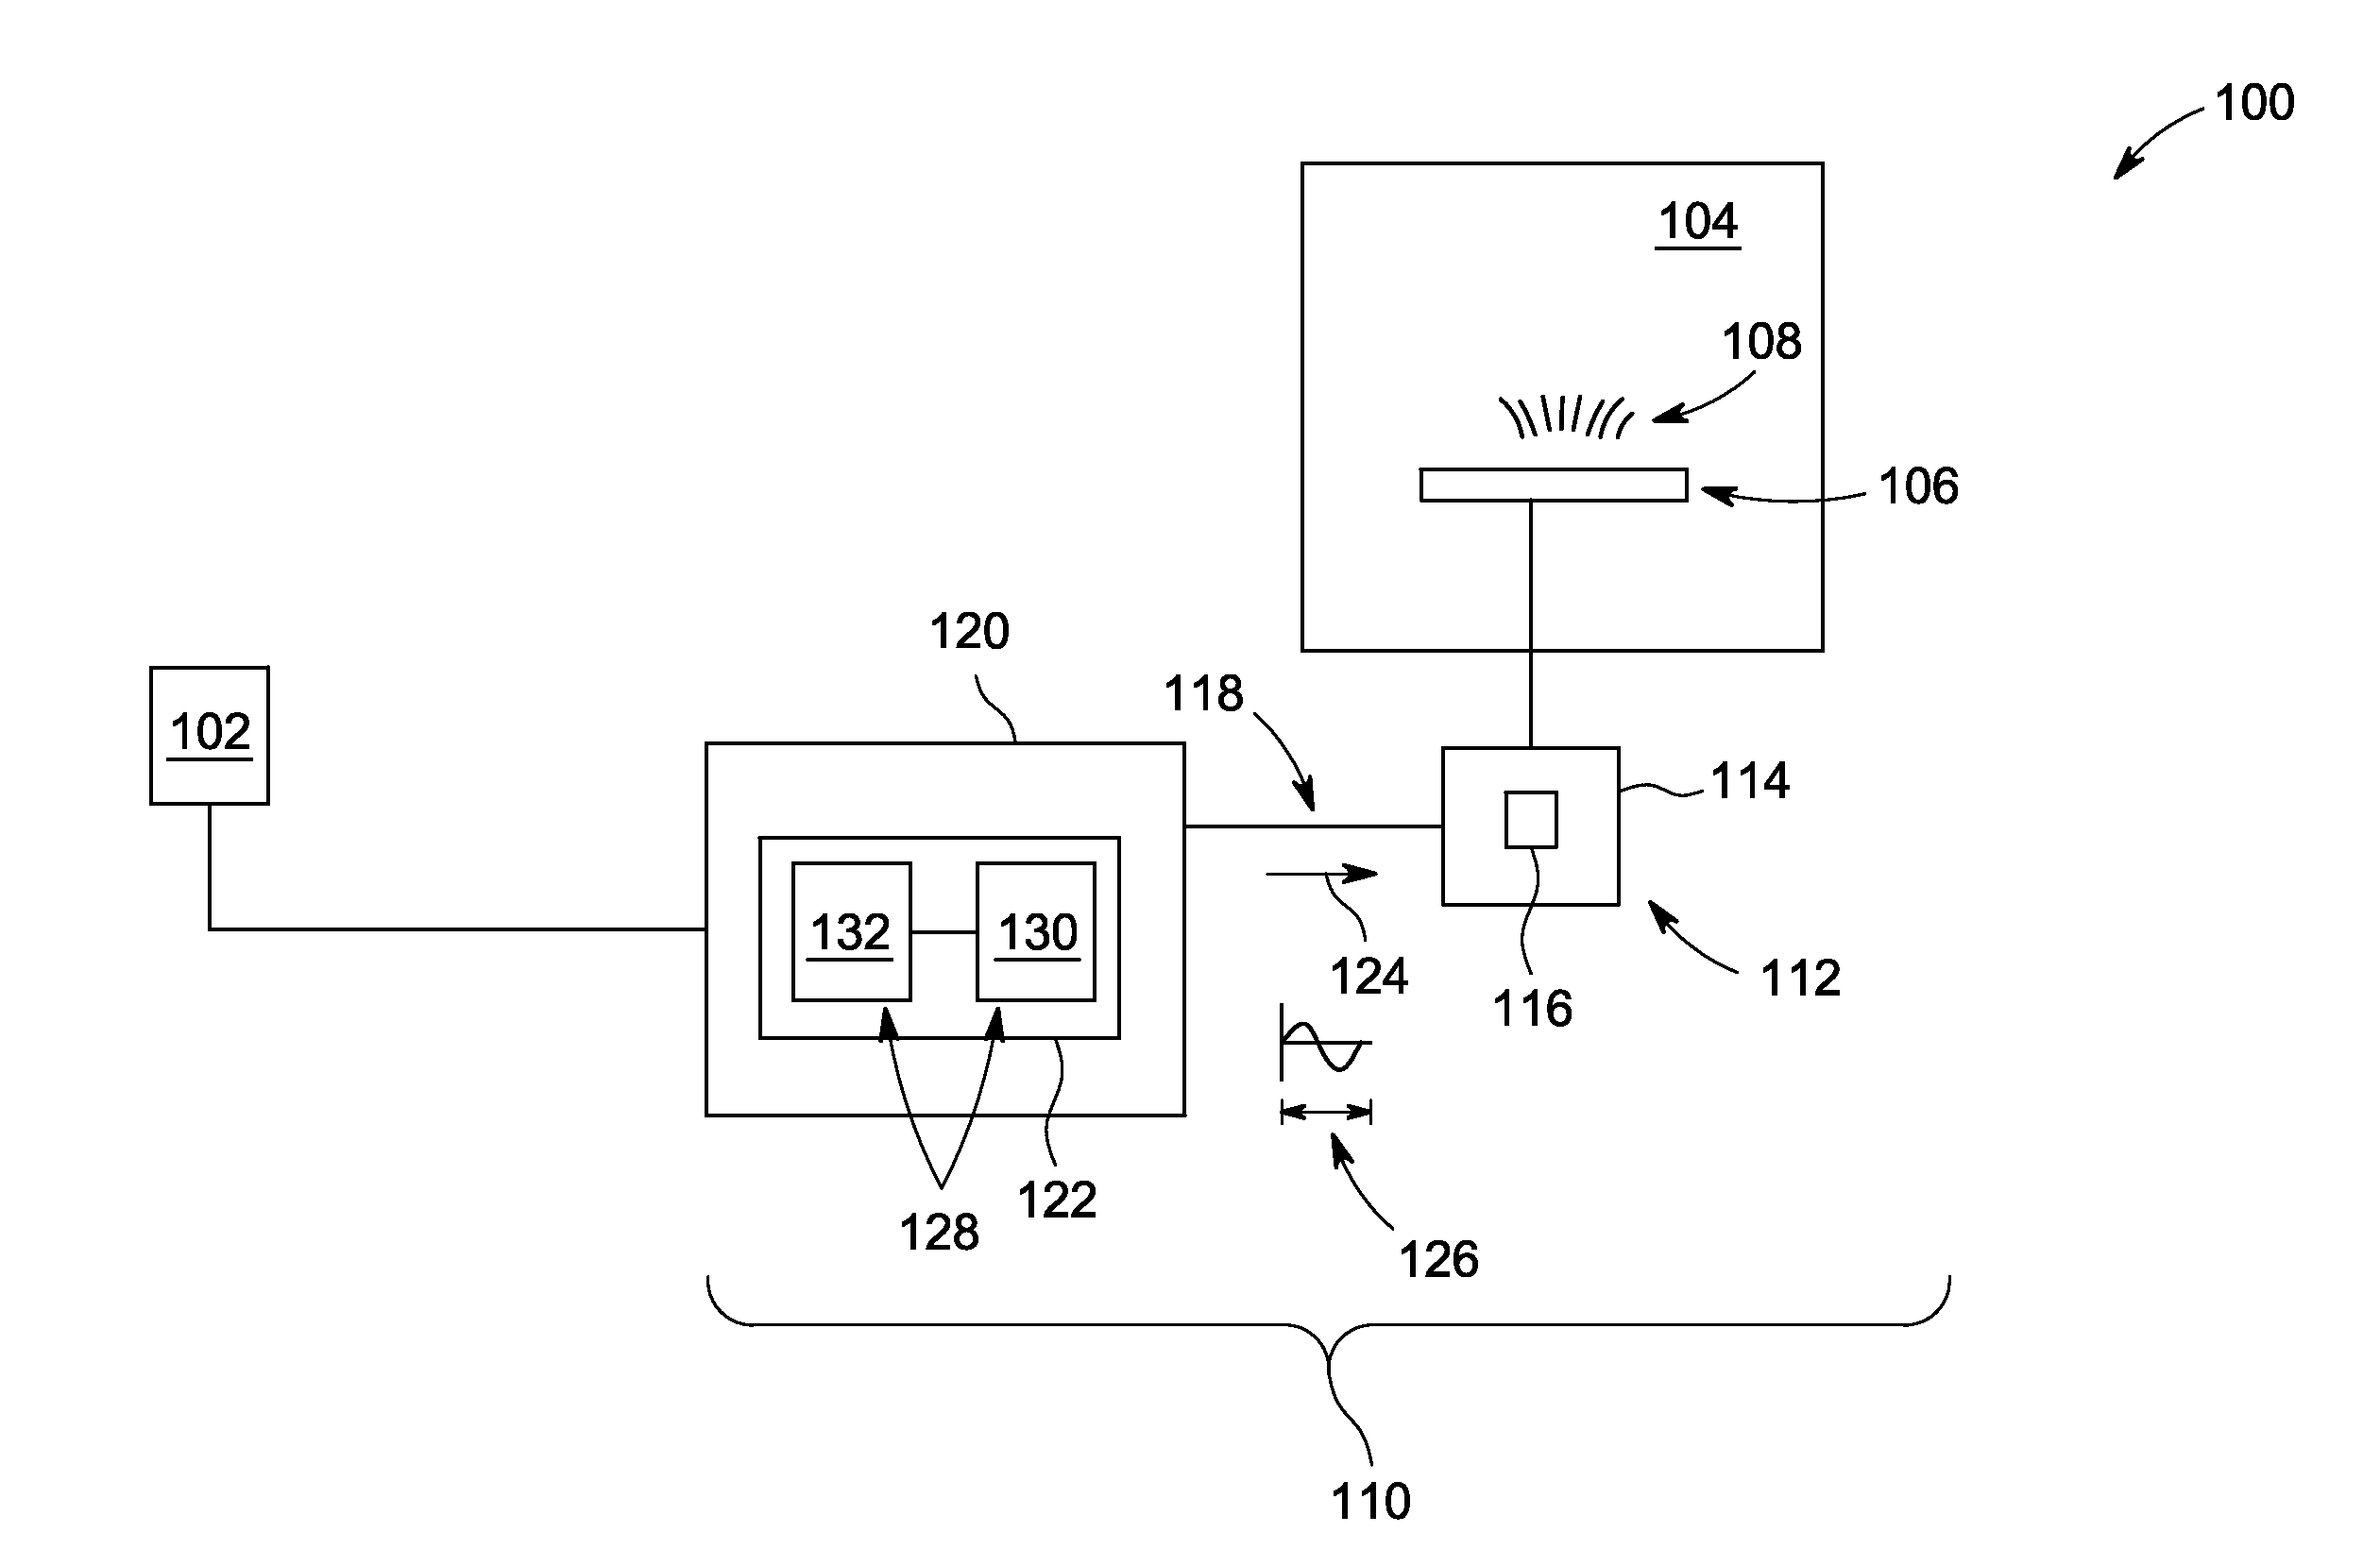 Appliance device with motors responsive to single-phase alternating current input